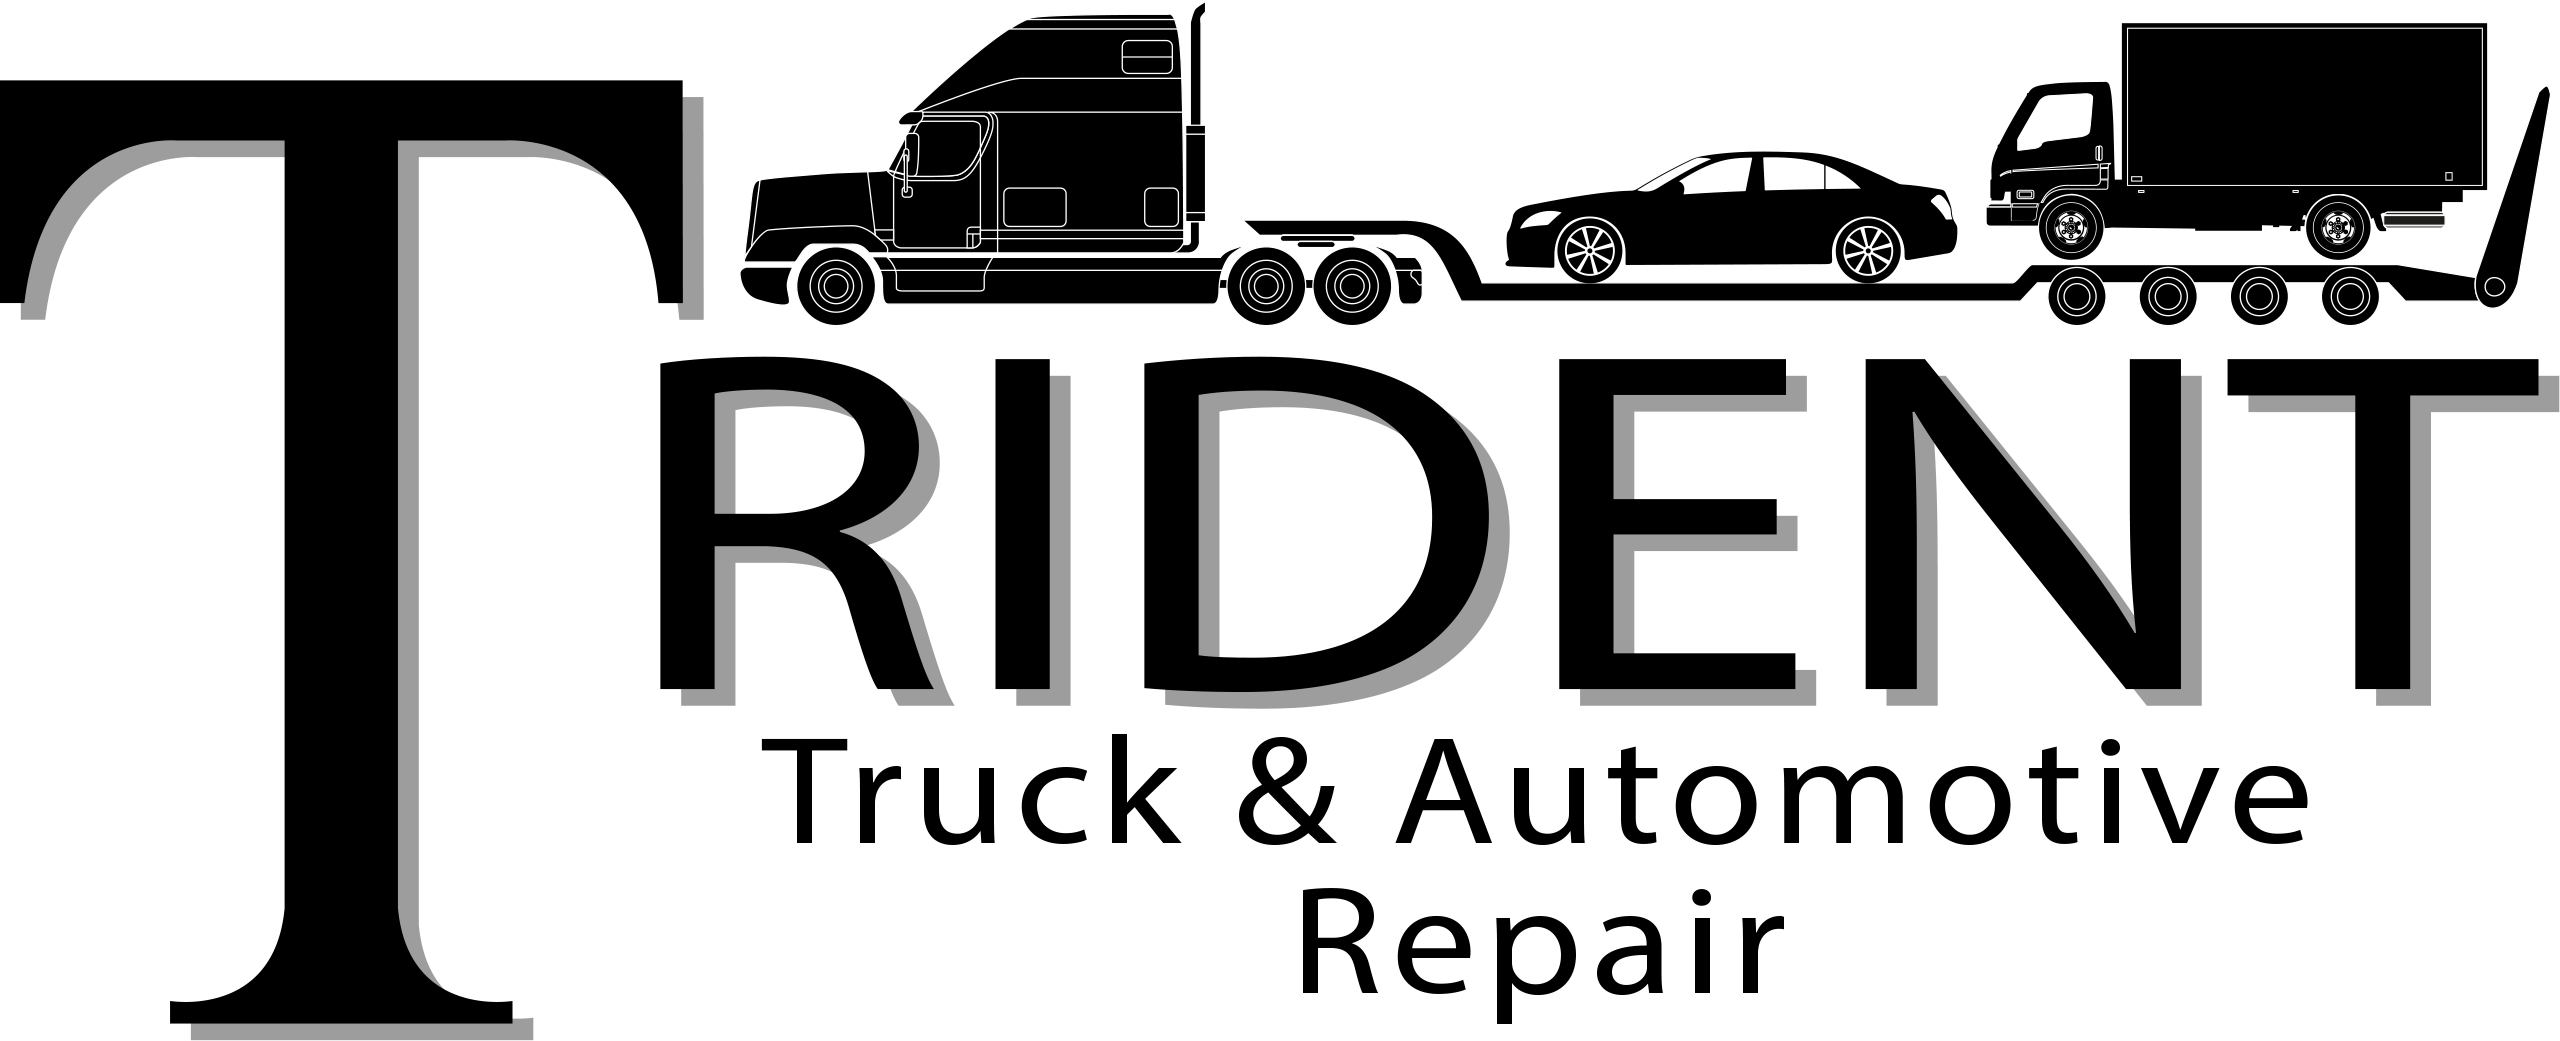 Trident Truck and Automotive Repair